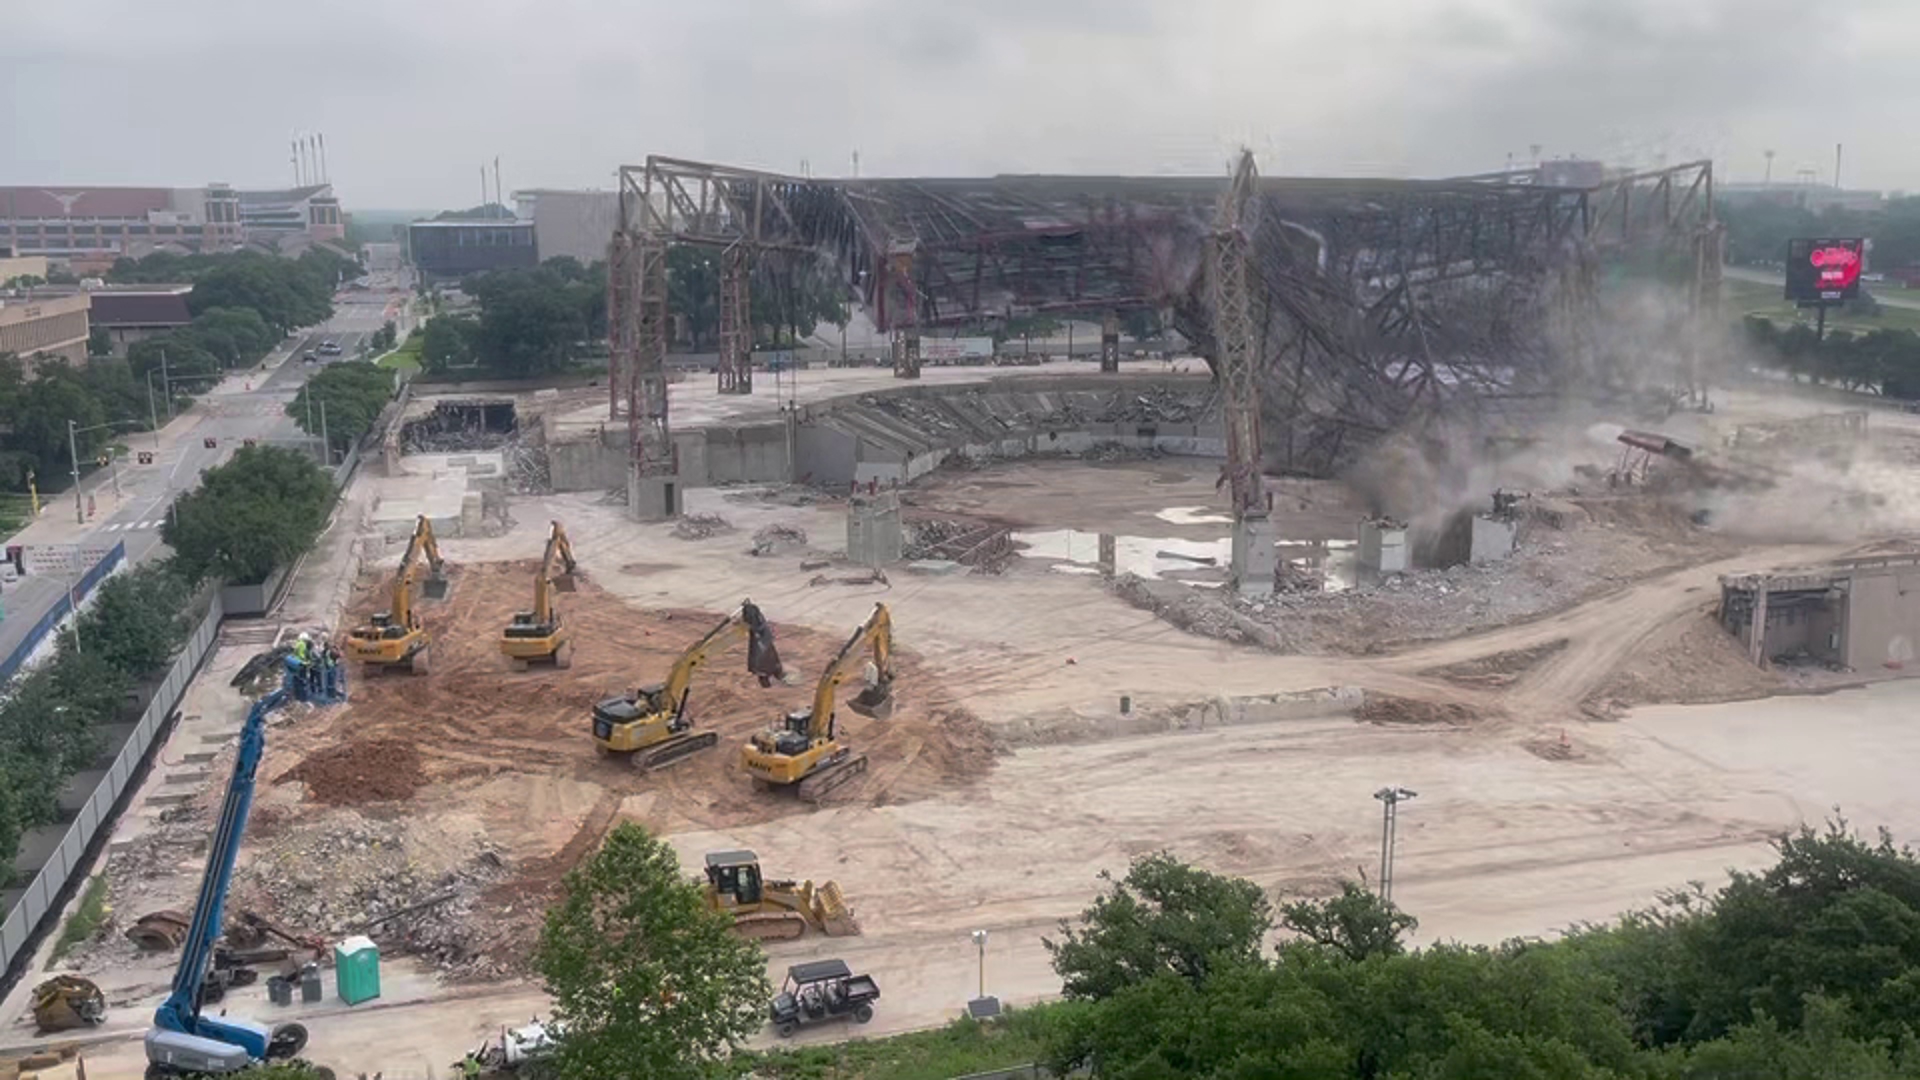 Deconstruction of the former arena had taken place for months, before the final beam was knocked down Sunday.